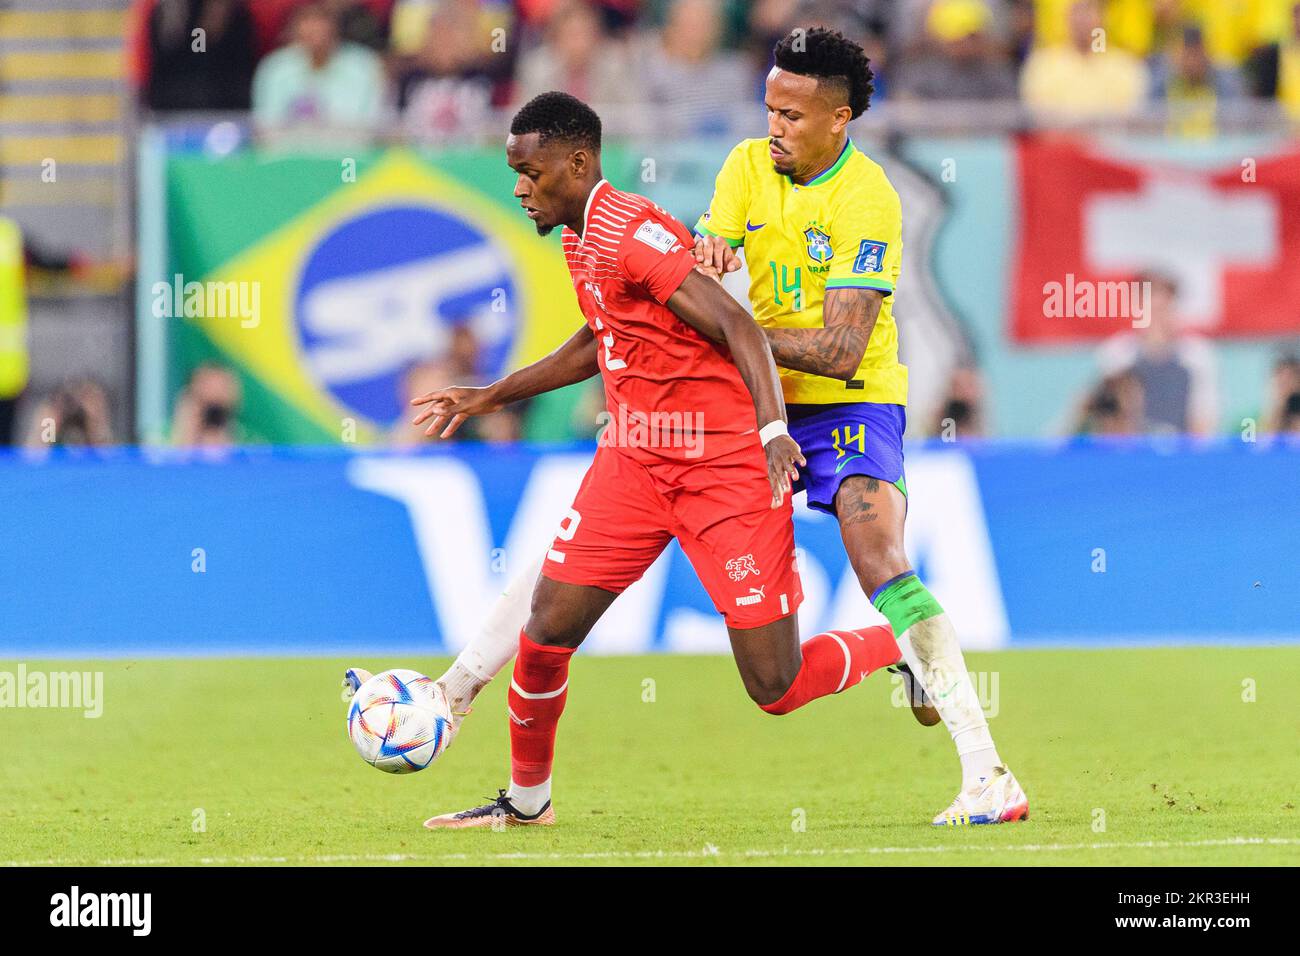 Doha, Qatar. 28th Nov, 2022. 974 Stadium Edimilson Fernandes of Switzerland and Eder Militao of Brazil during a match between Brazil and Switzerland, valid for the group stage of the World Cup, held at 974 Stadium in Doha, Qatar. (Marcio Machado/SPP) Credit: SPP Sport Press Photo. /Alamy Live News Stock Photo